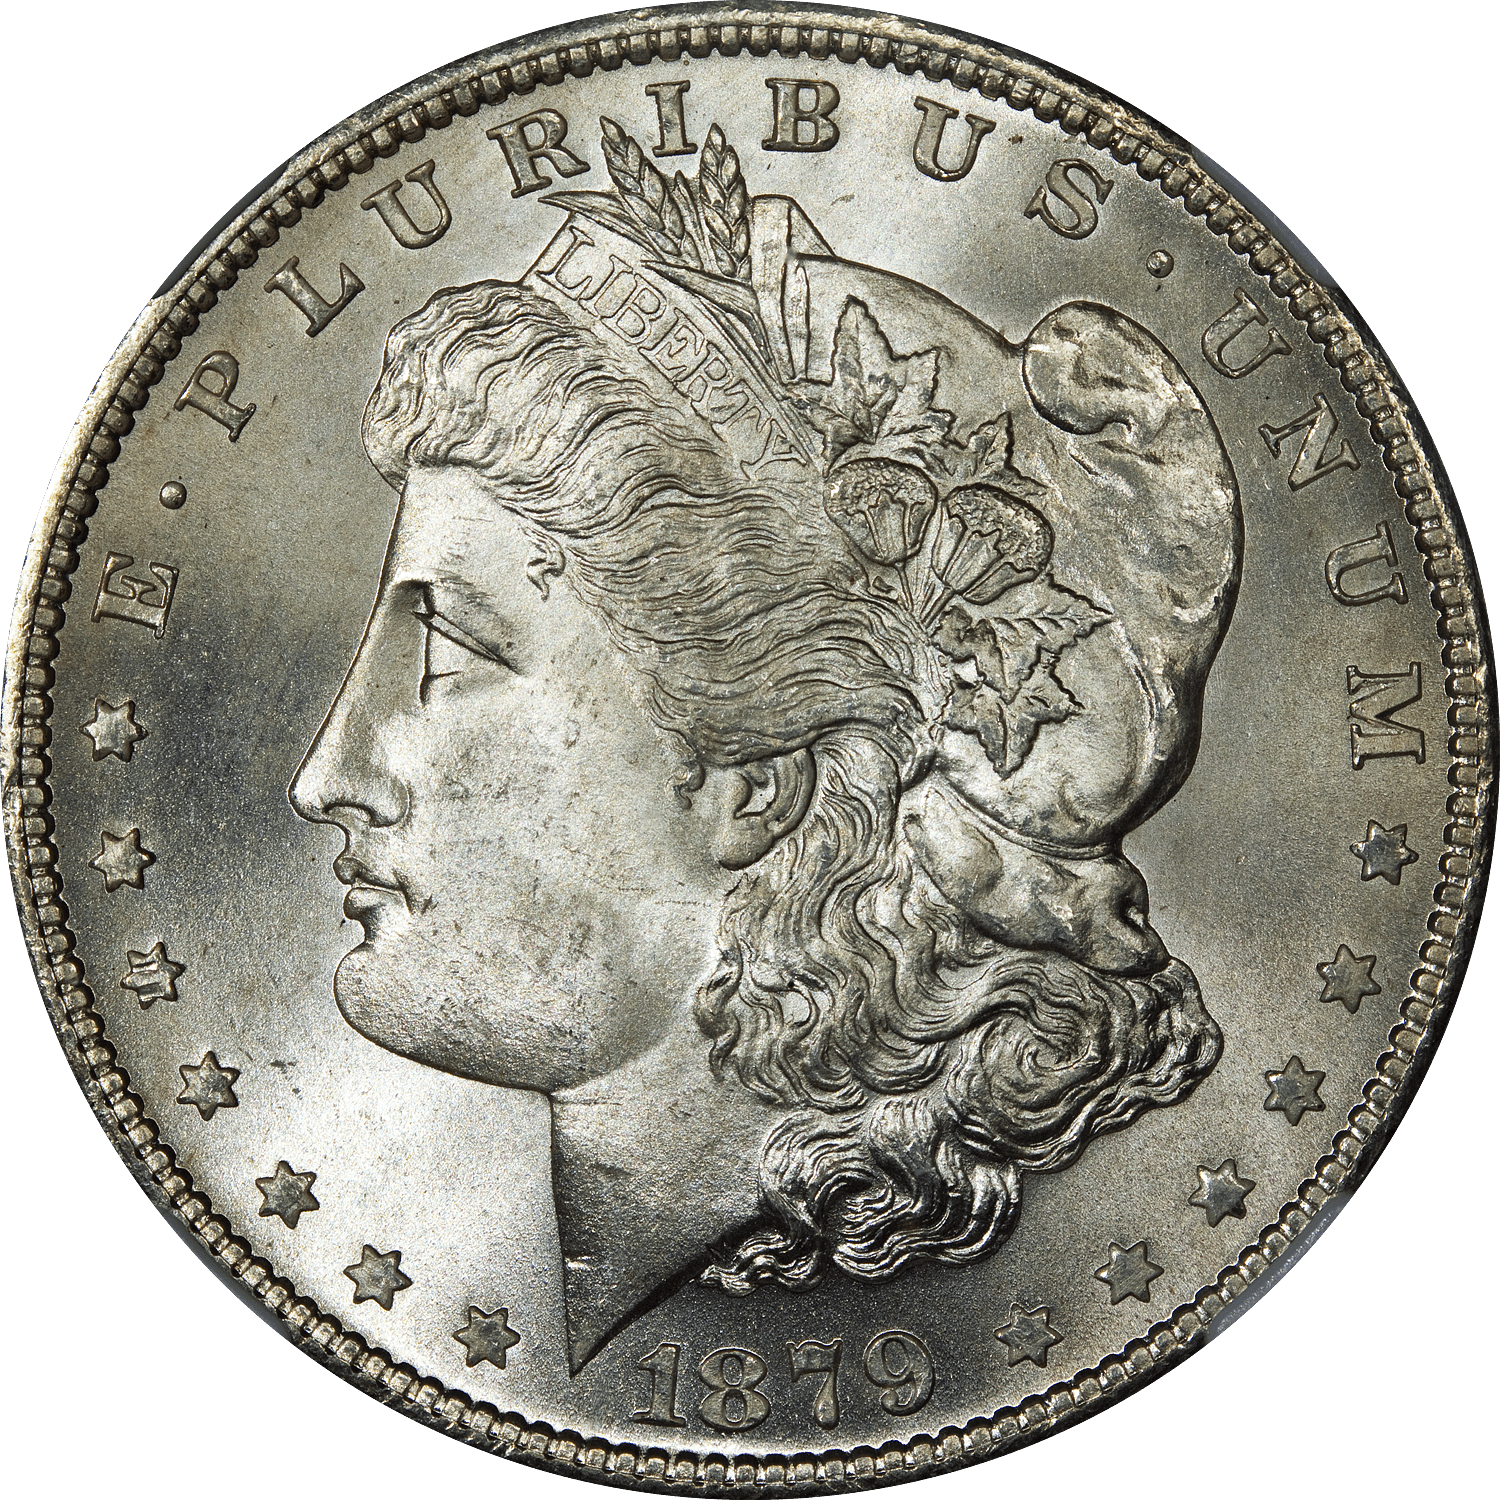 The obverse of the 1888 Morgan silver dollar